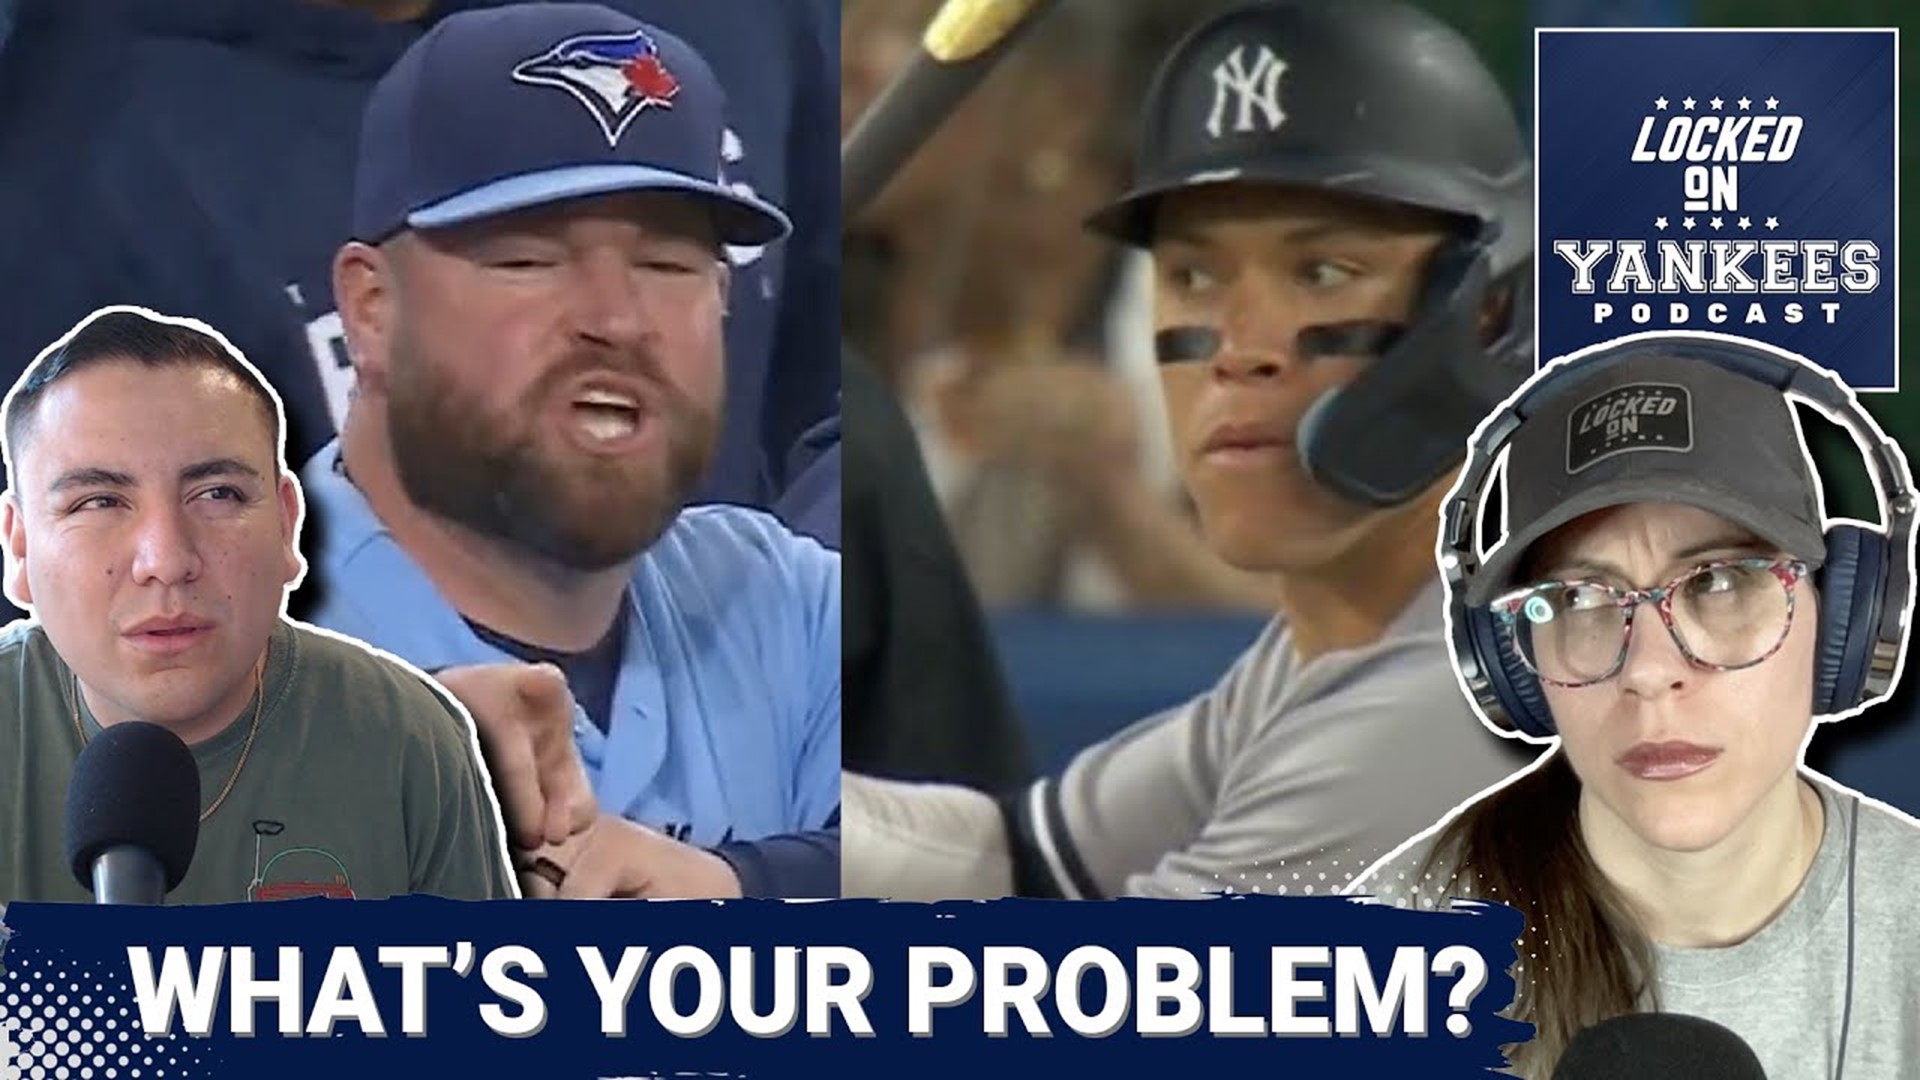 This Yankees-Blue Jays-Aaron Judge “controversy” is so dumb